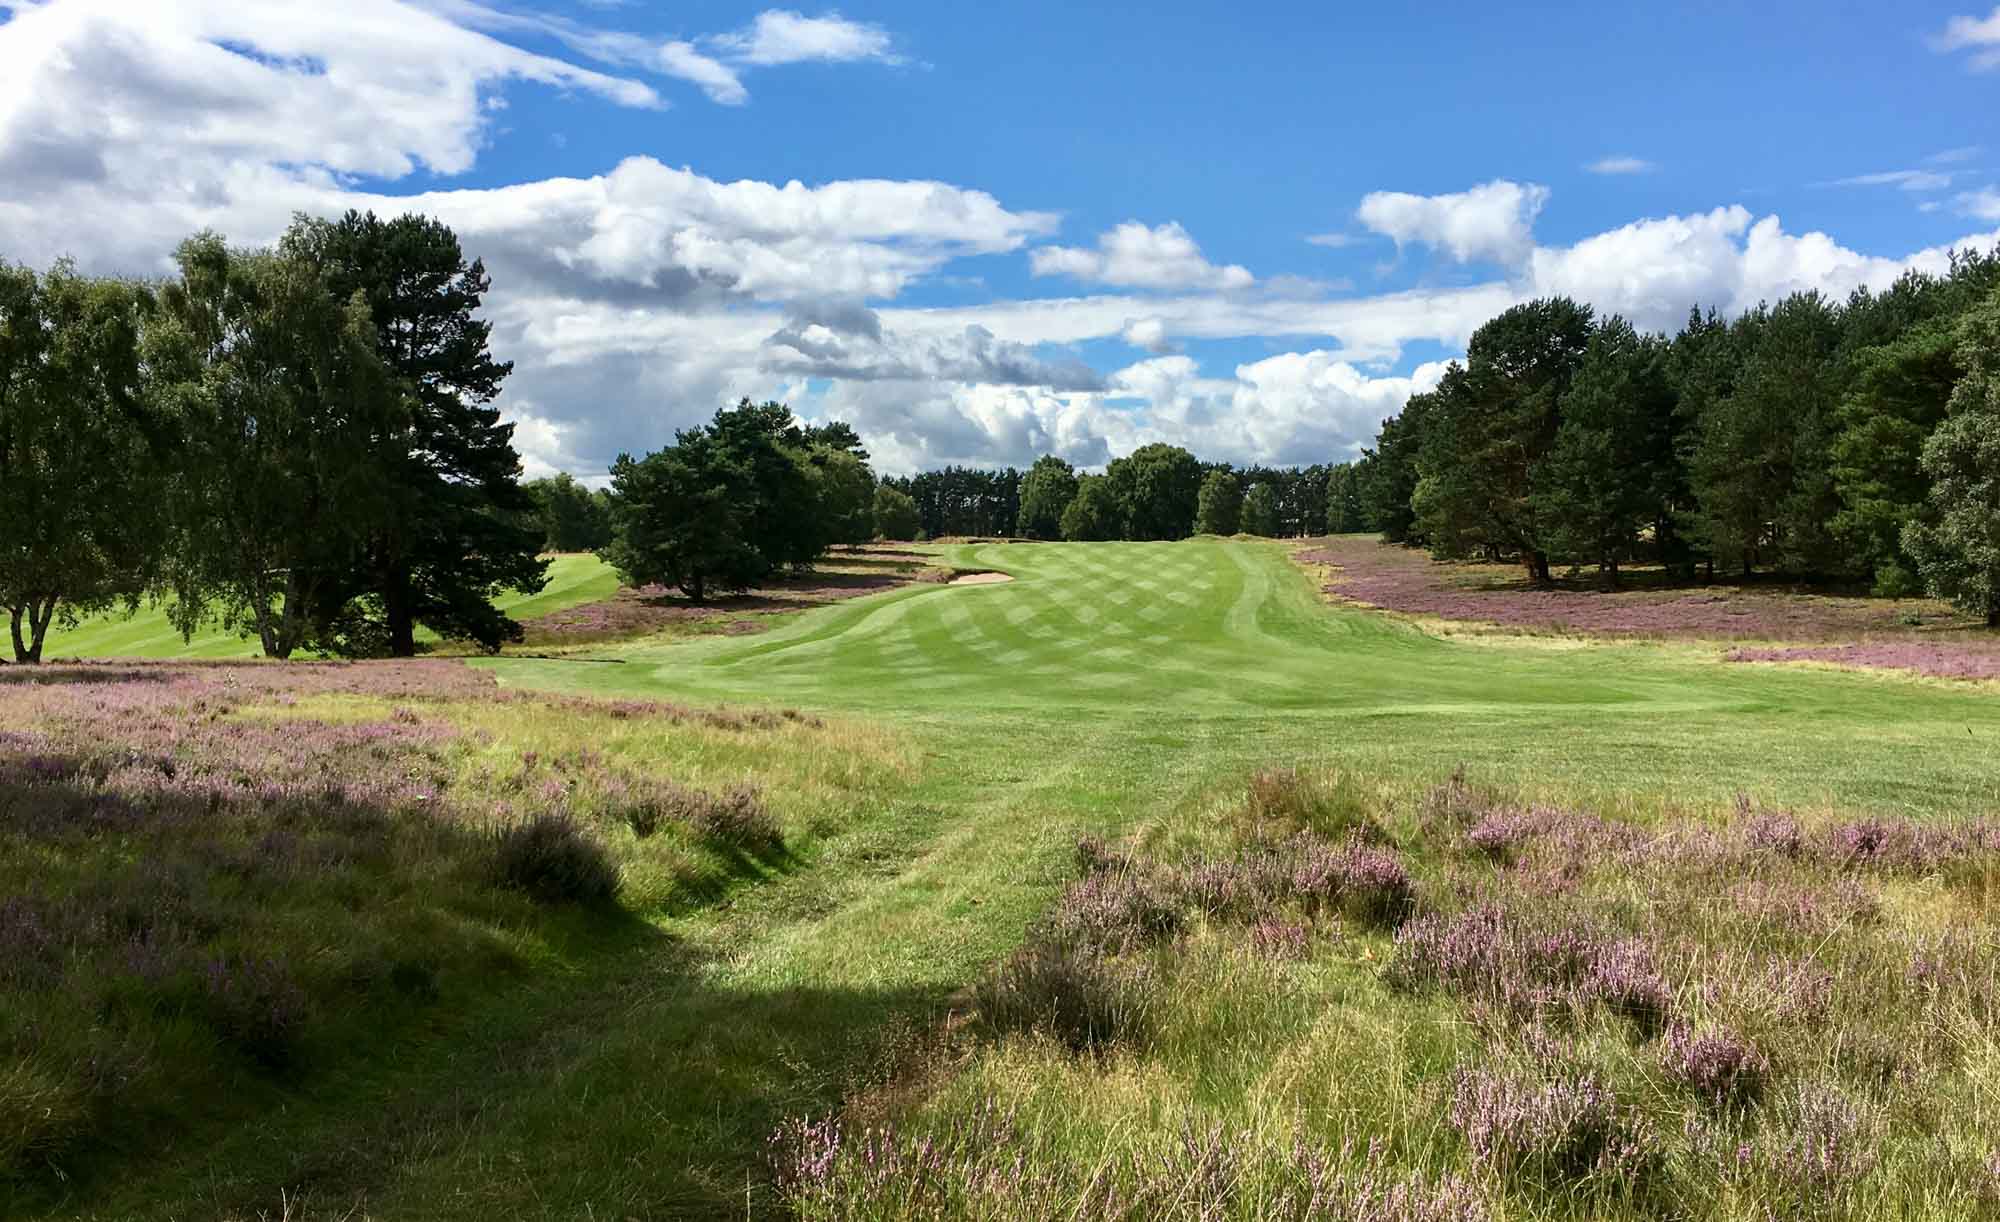 The heather in bloom at Enville Golf Club.